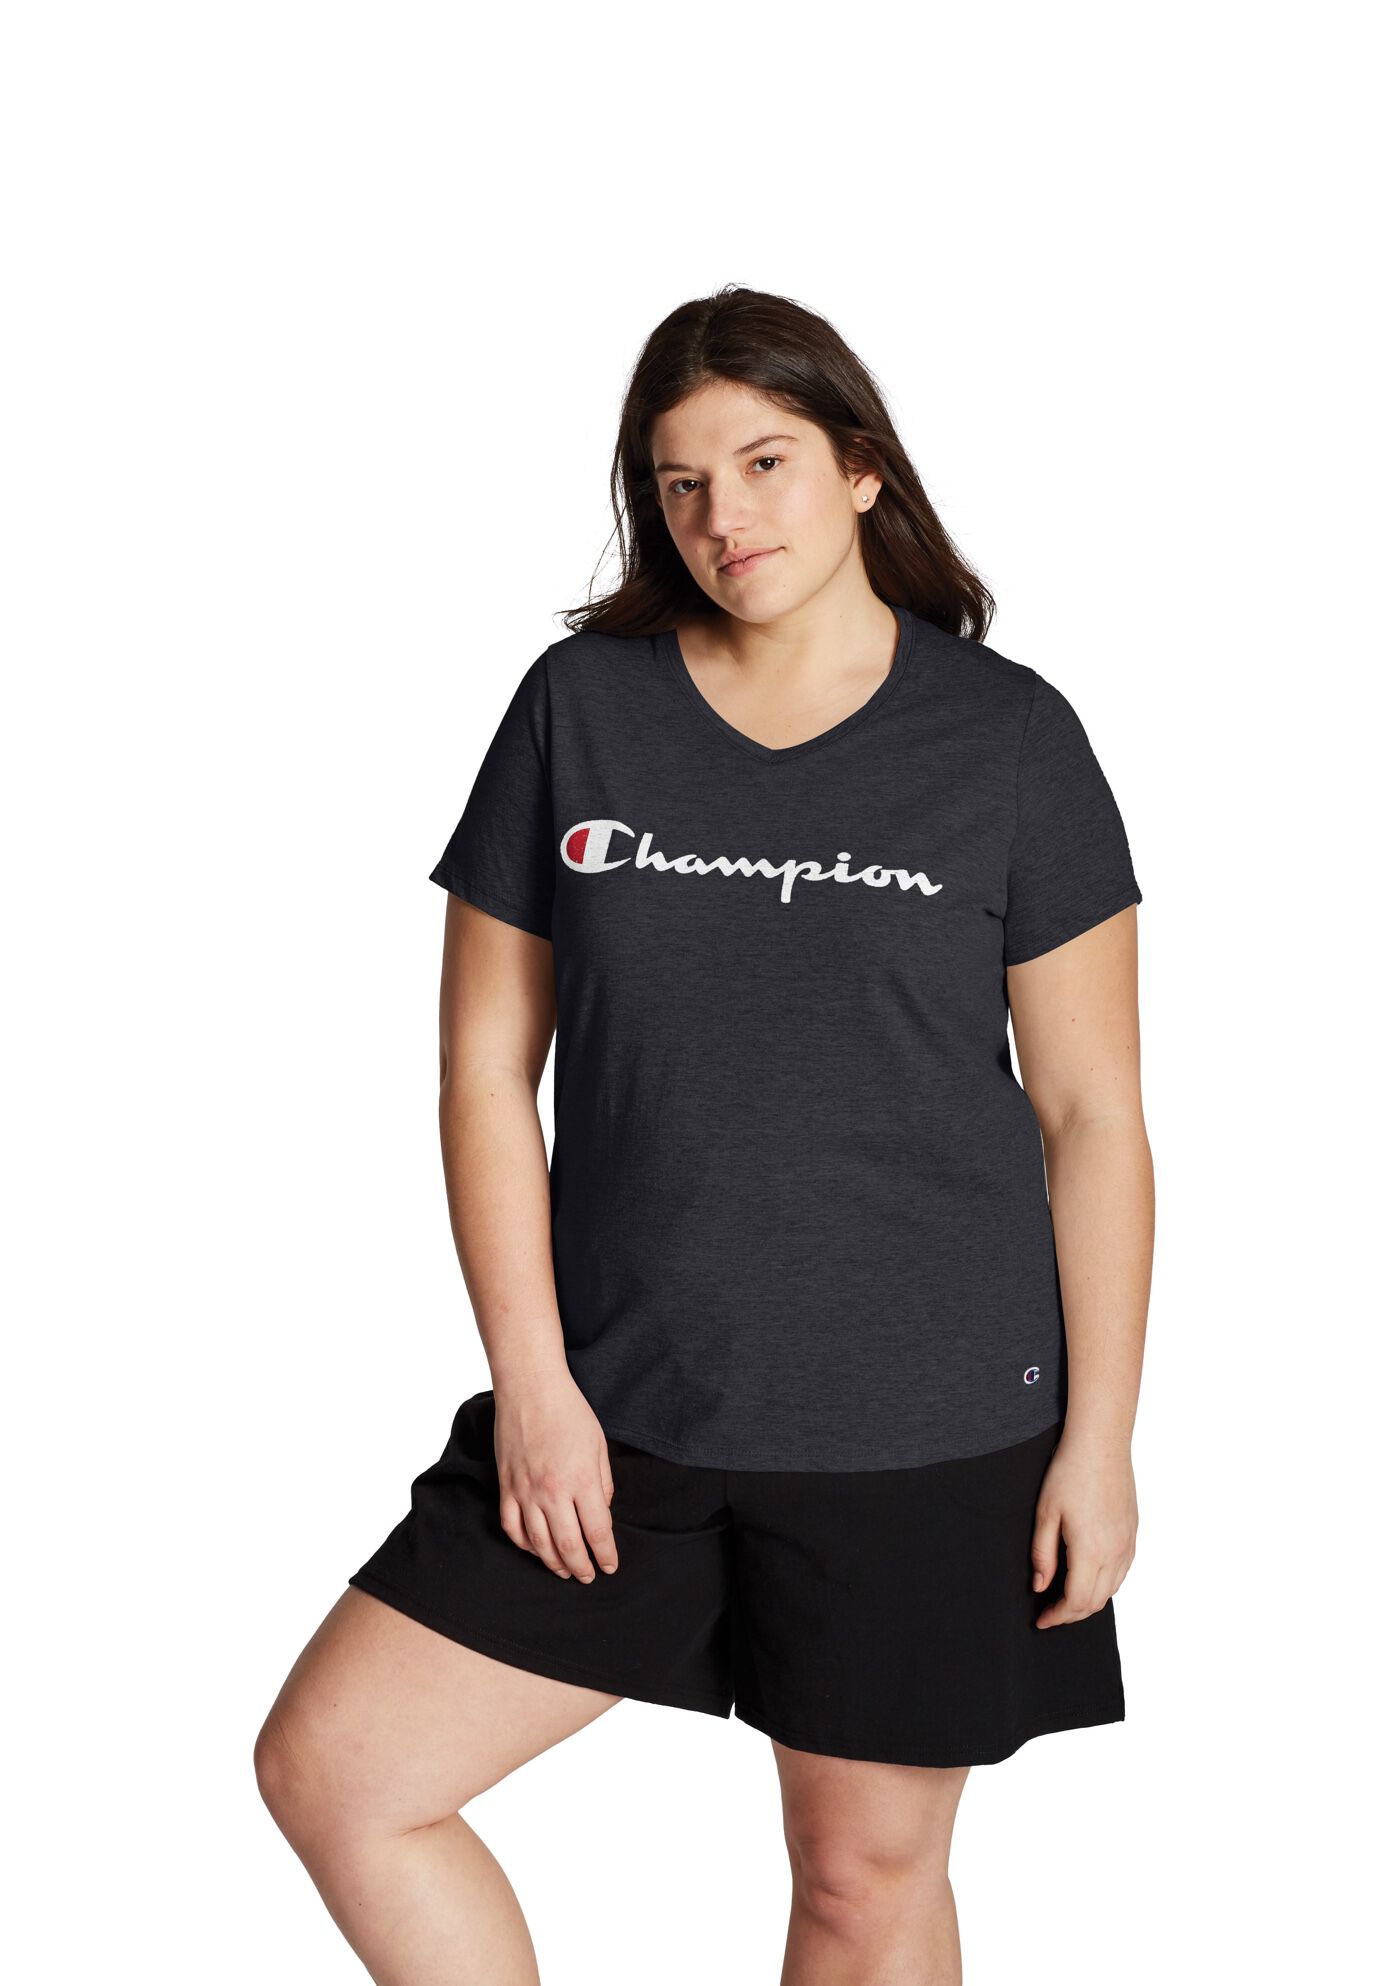 Plus Size Women's Jersey V-Neck Tee Graphic-Classic Script by Champion in Black (Size 4X)